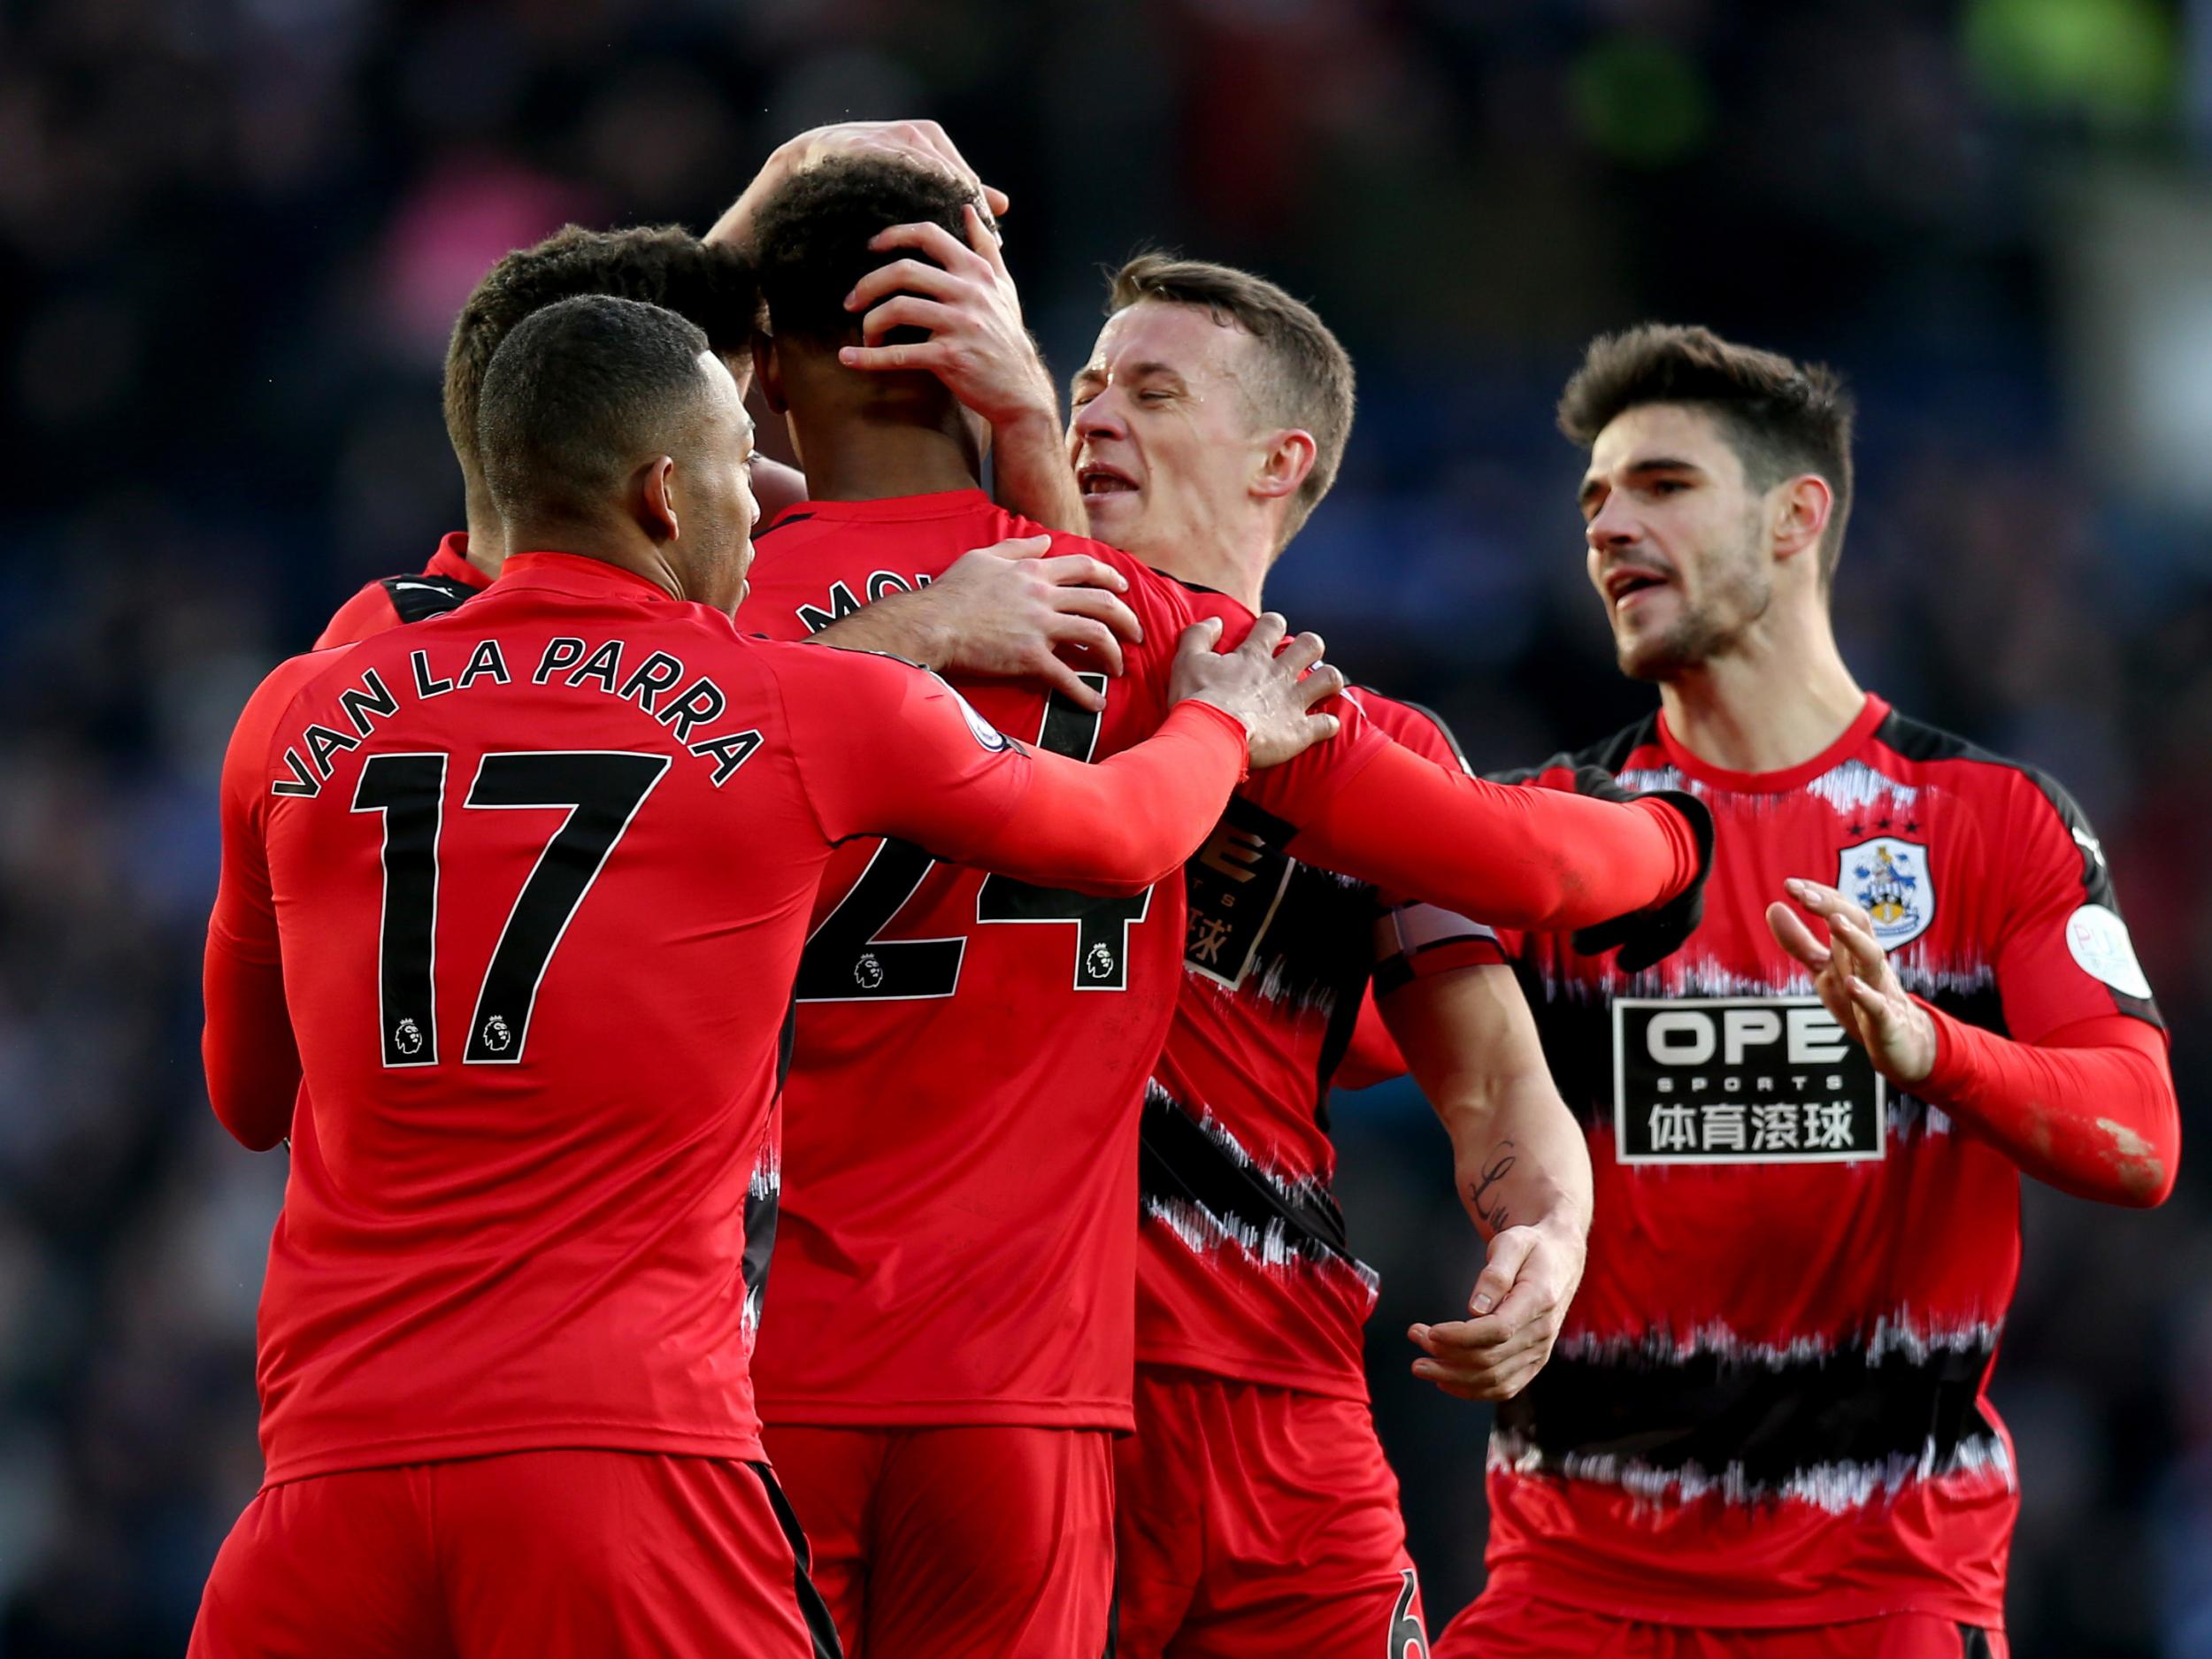 Huddersfield are now three points clear of the drop